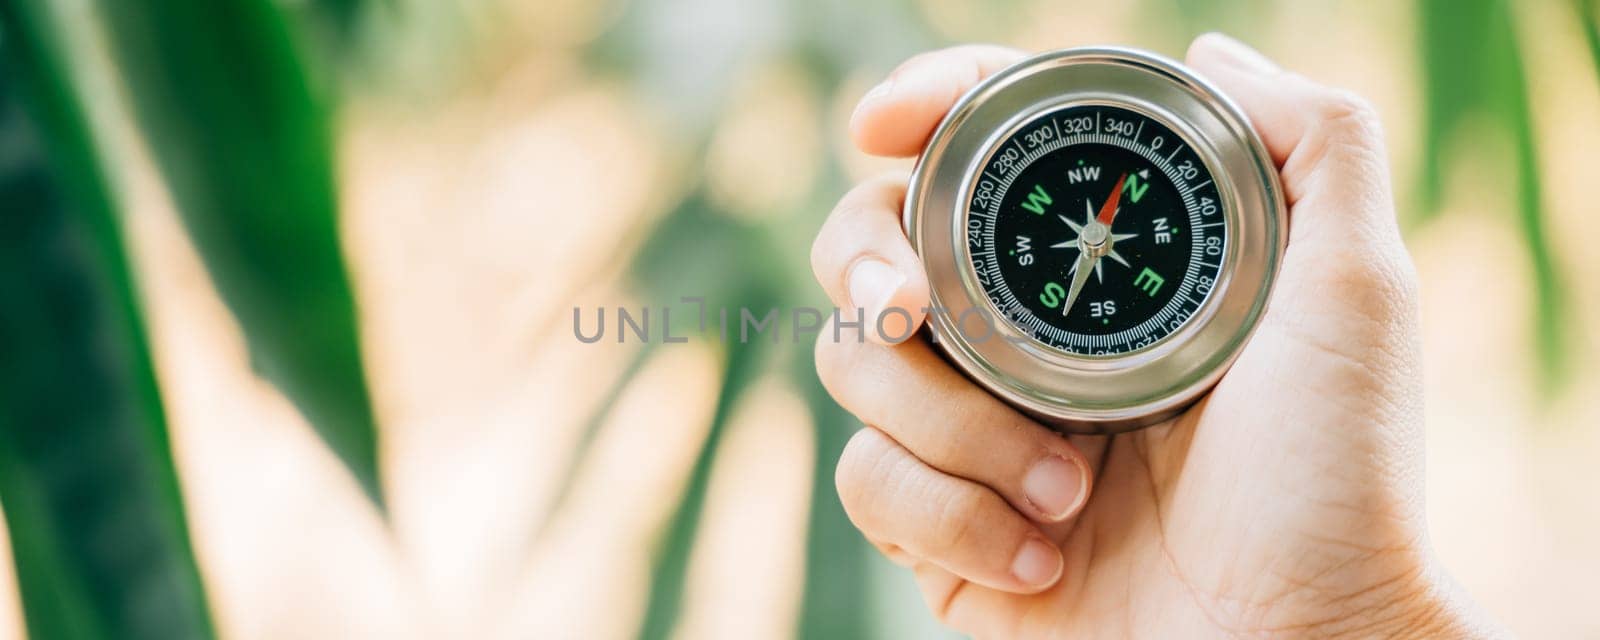 A traveler holding a compass in a park searches for guidance and direction amidst nature beauty. The compass in the woman hand signifies exploration and a journey to find her path.